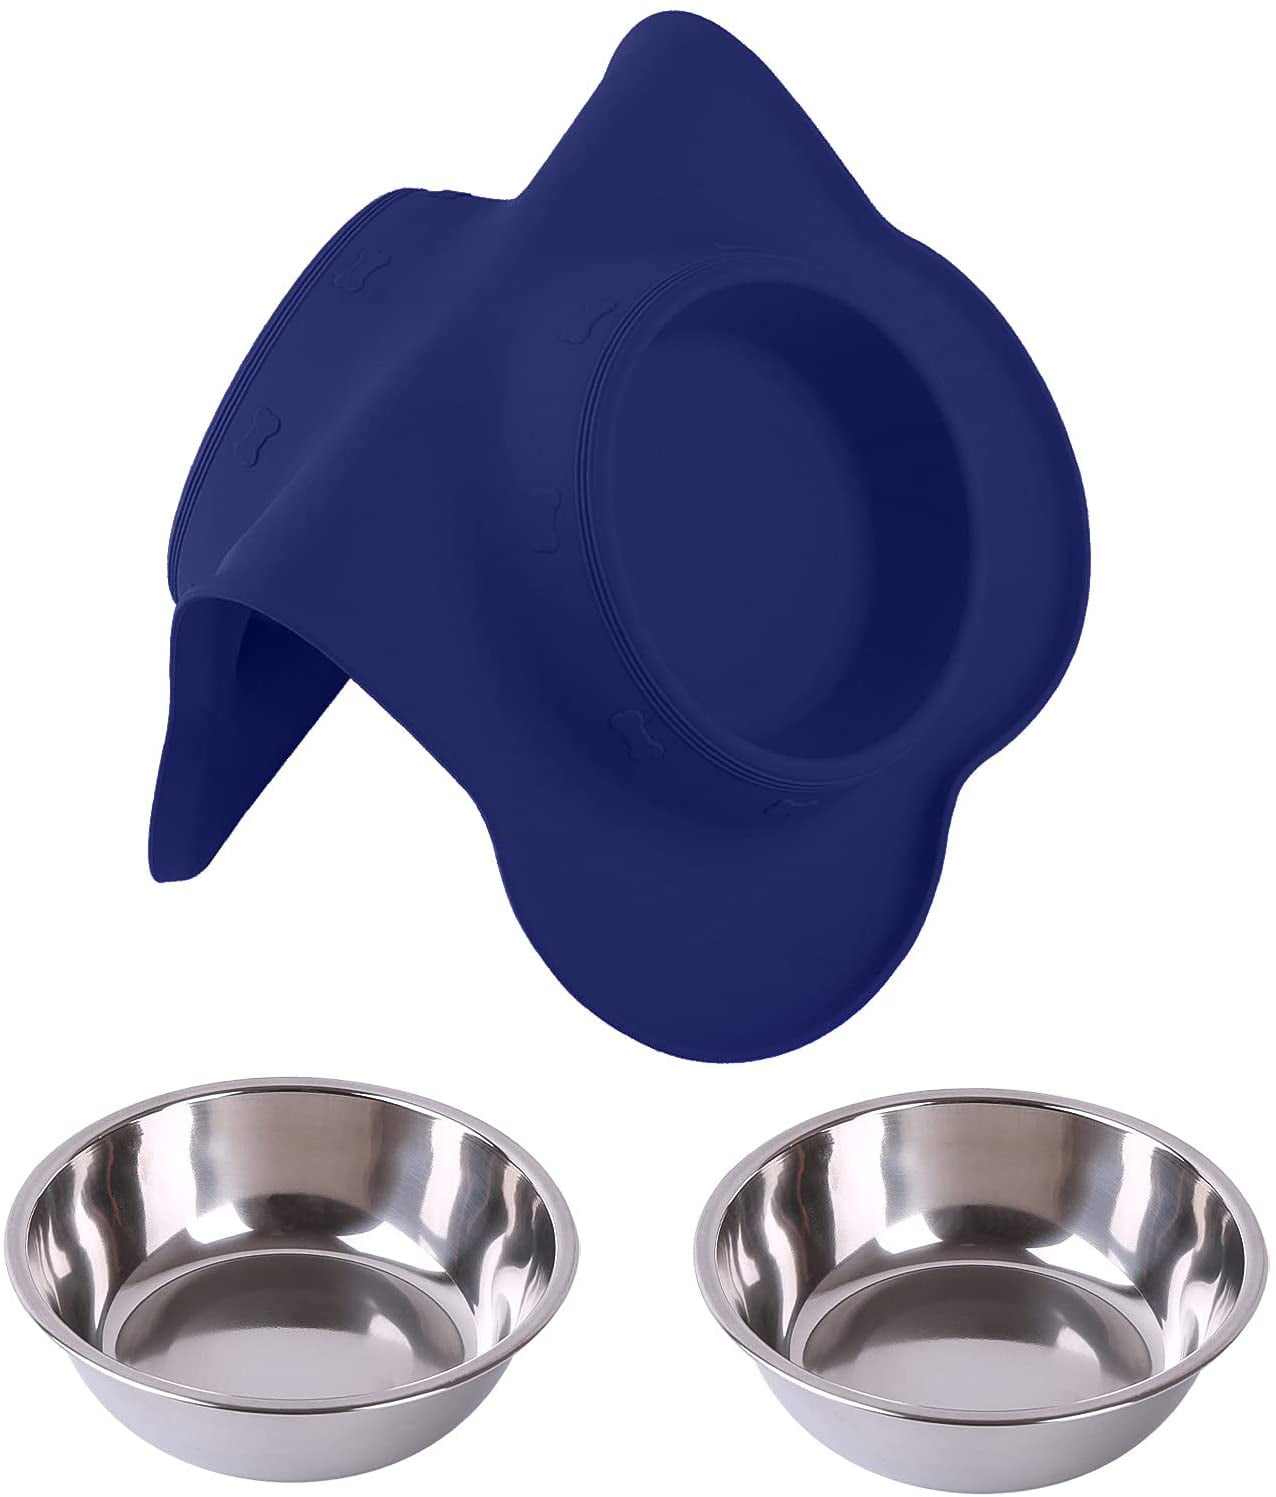 JOJOPEPE Stainless Steel Dog Bowls with Silicone Mat, Set of 2, Non-Skid, No-Spill Design, Rust-Resistant, Easy to Clean, Promotes Healthy Eating